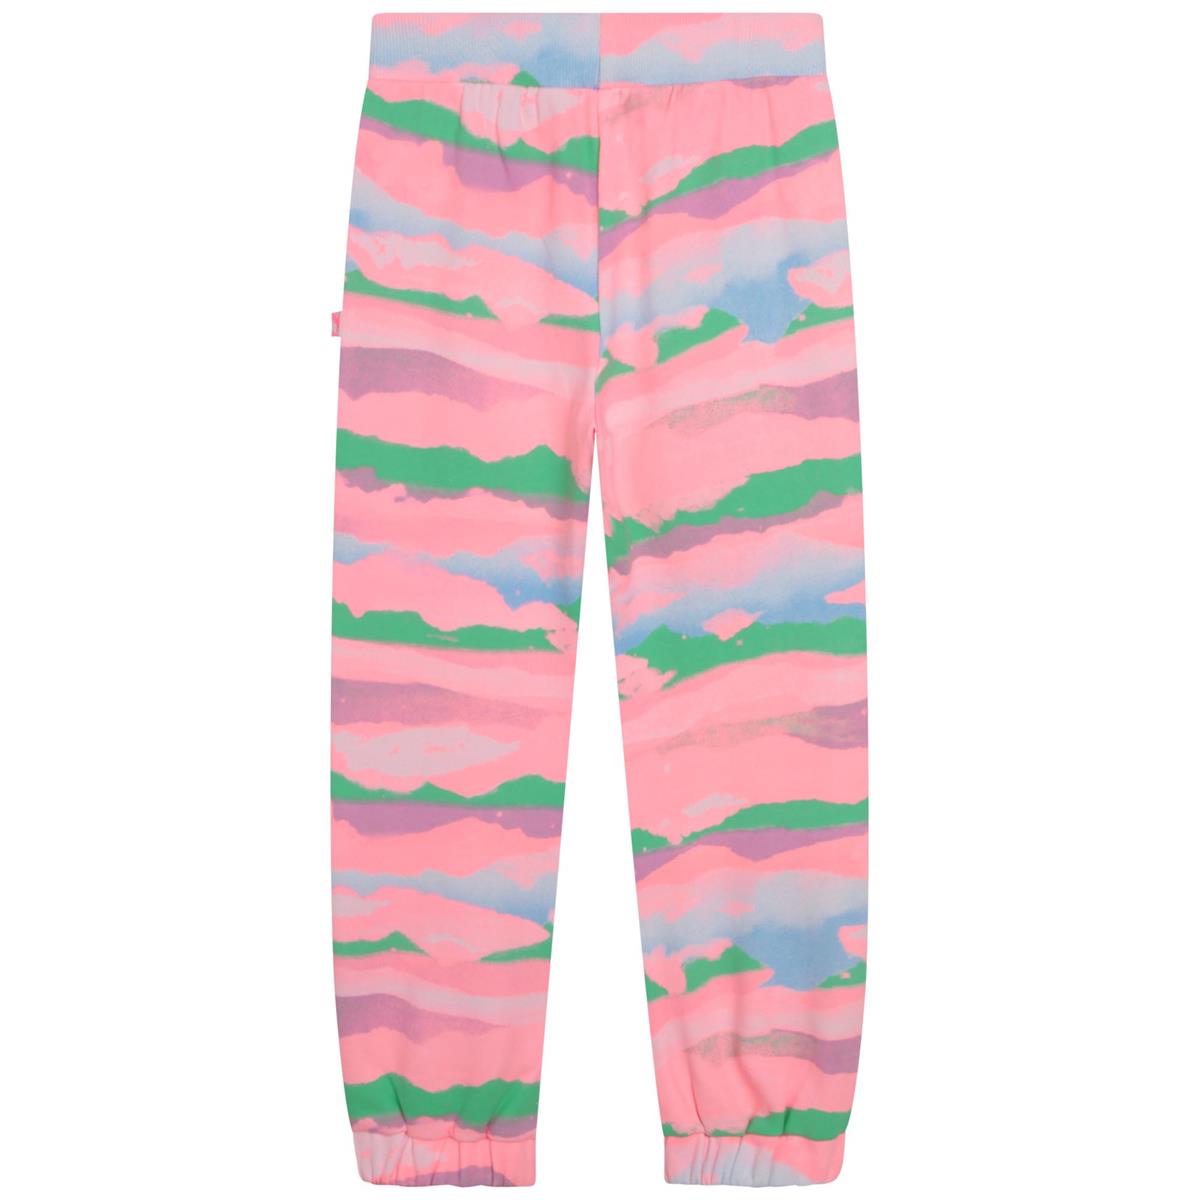 Girls Pink Trousers